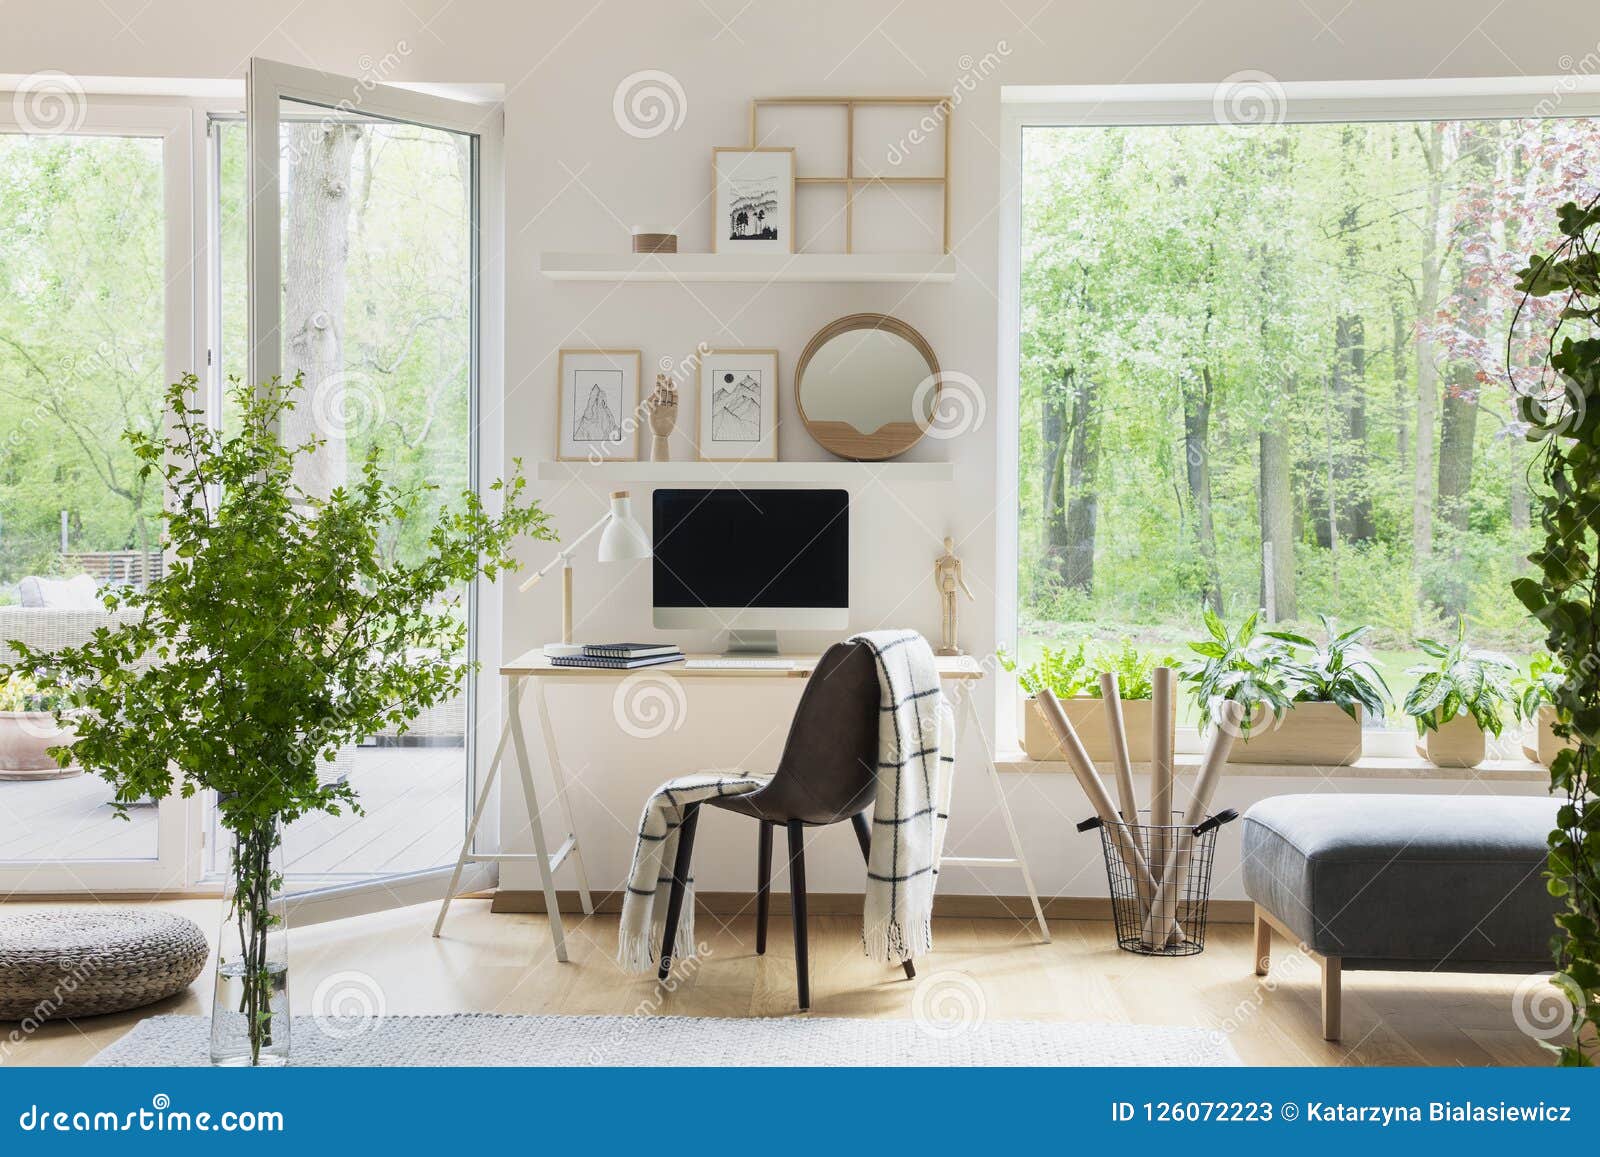 real photo of white living room interior with big window, glass door, fresh plants, wooden desk with mockup computer and simple po